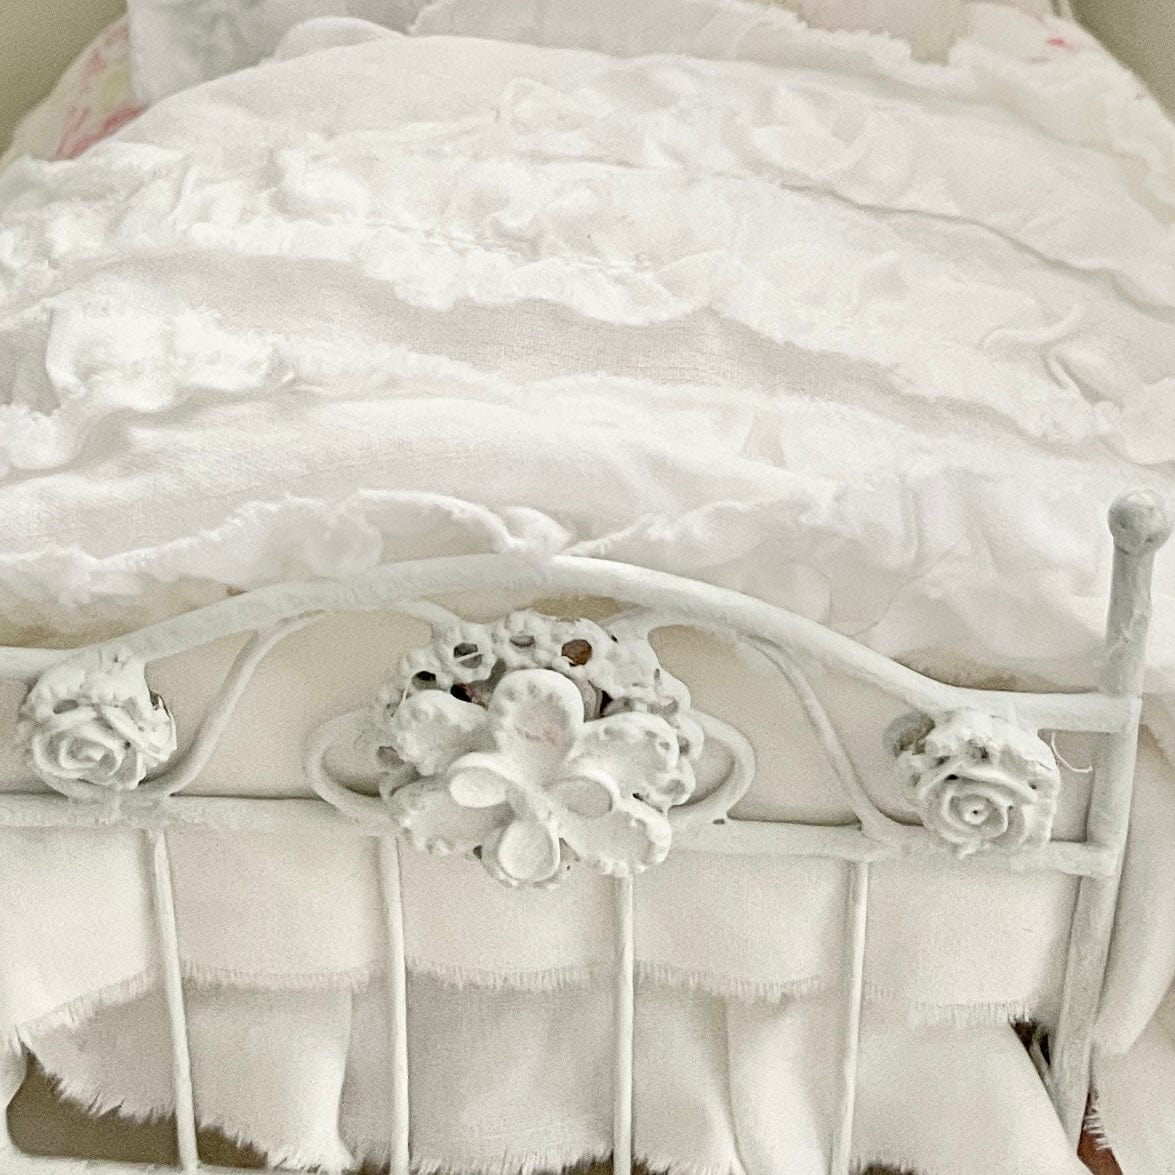 Chantallena Doll House Dressed 1:12 Scale Bed | White Metal Bed with White Cotton Bedding Set |Fay